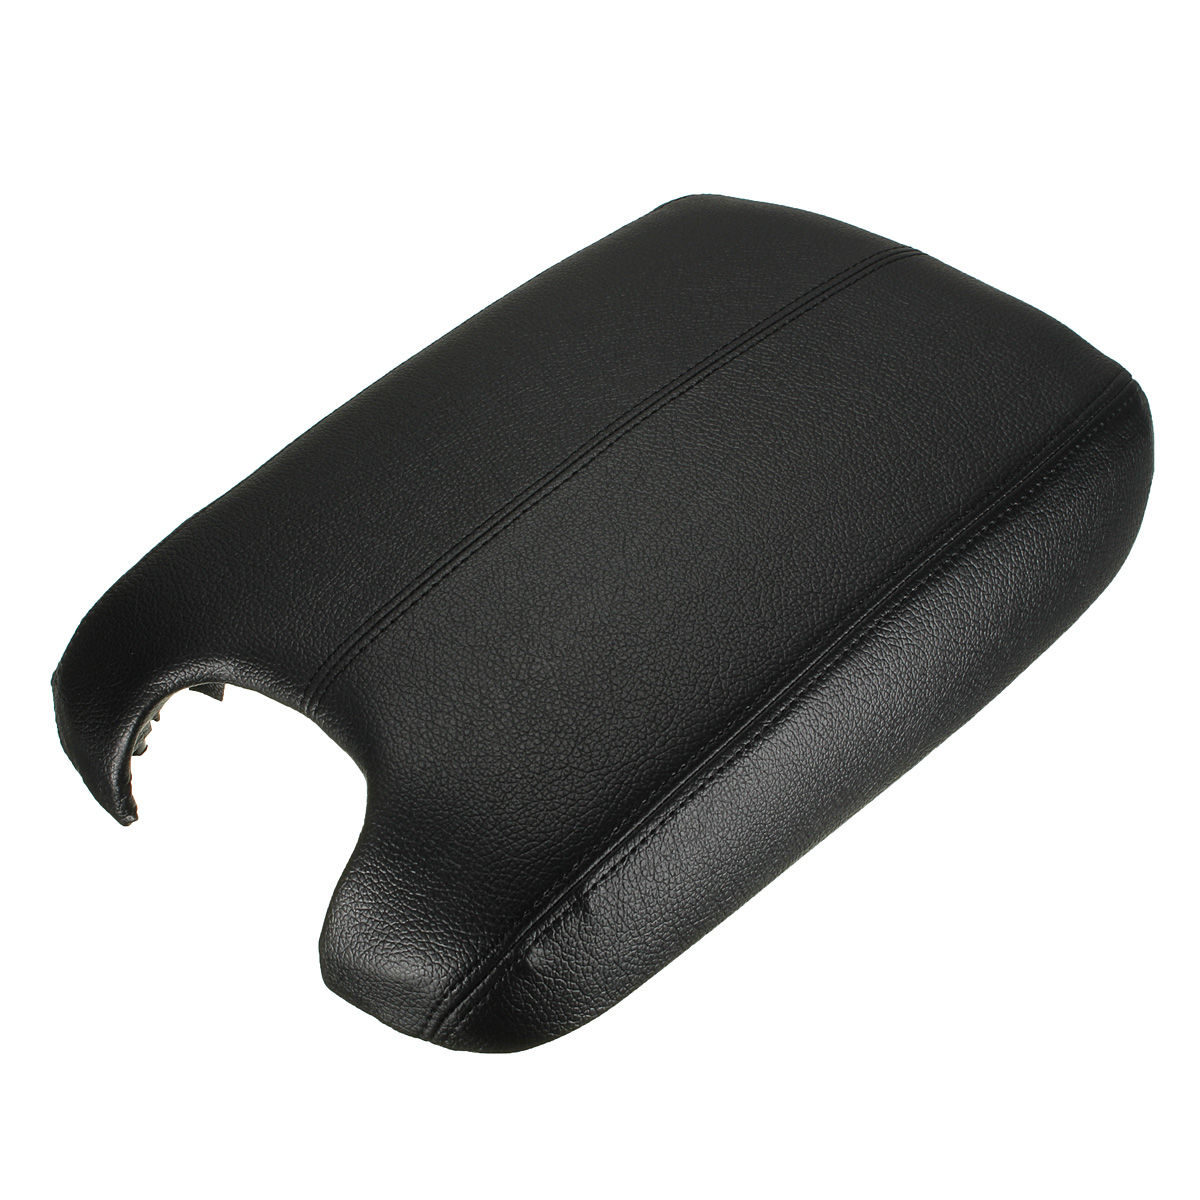 Armrest covers for 2008 honda accord #6